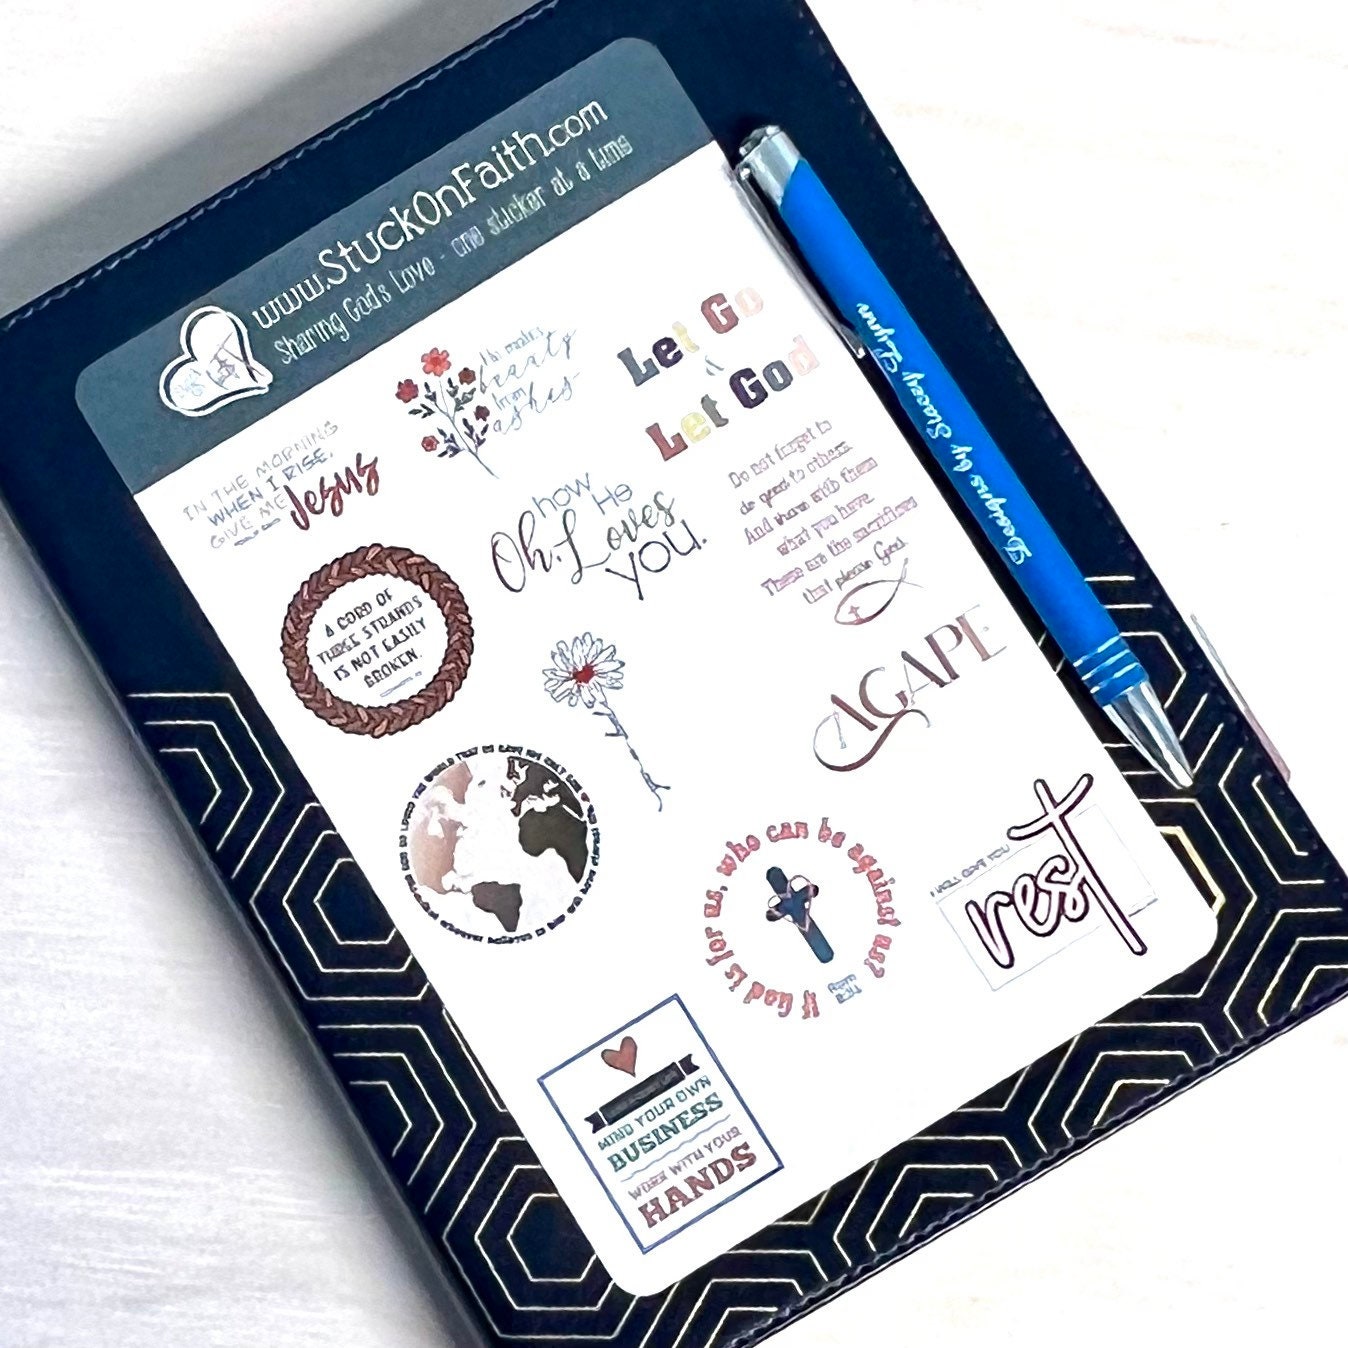 Christian Sticker Pack, Twelve Faith Stickers, Planner Stickers, Bible Verse Stickers, Removable paper stickers, Agape pack